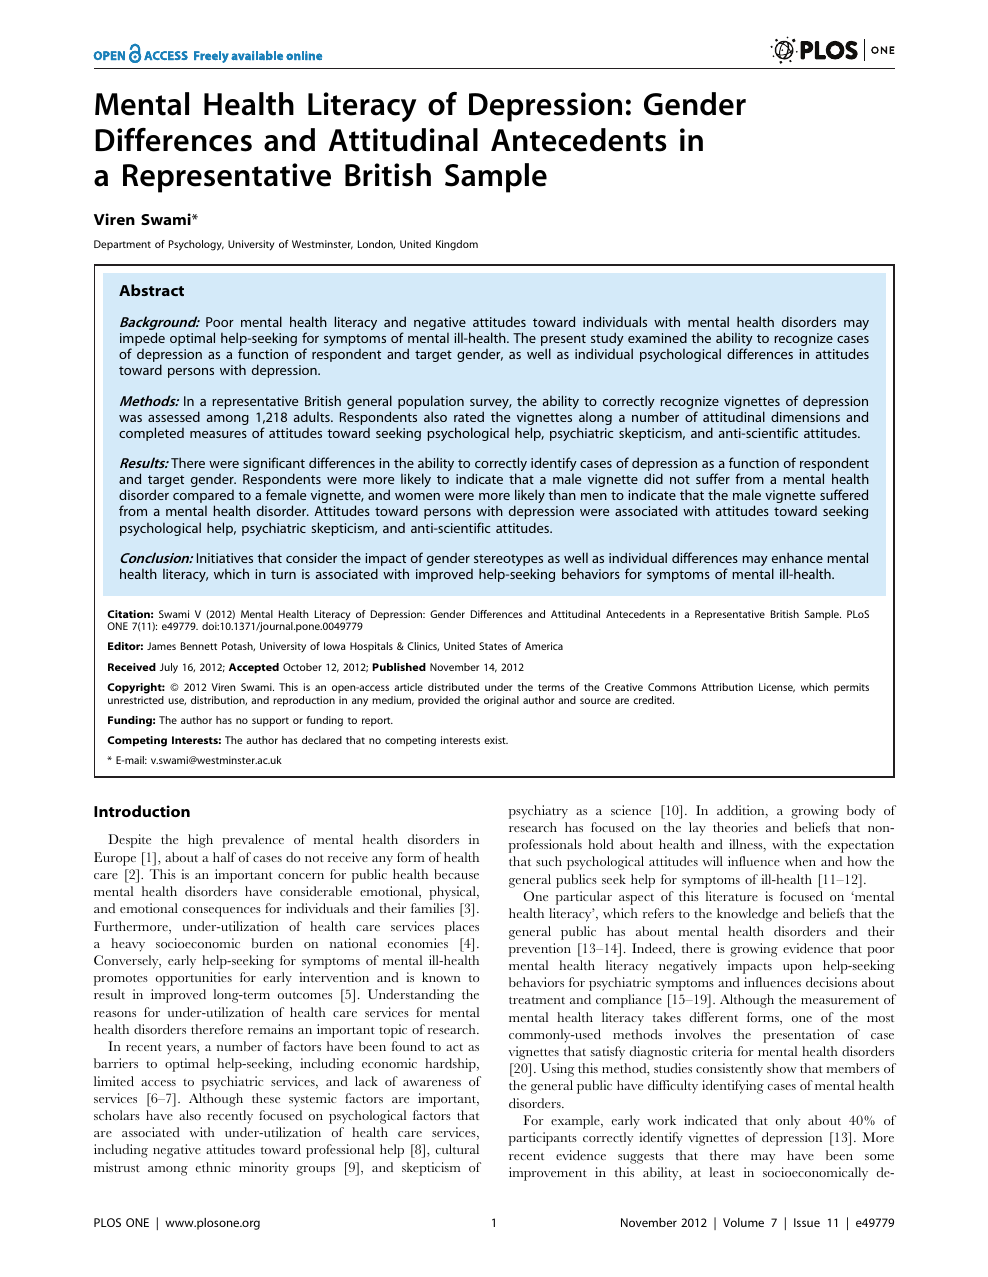 Mental Health Literacy Of Depression Gender Differences And Attitudinal Antecedents In A Representative British Sample Topic Of Research Paper In Psychology Download Scholarly Article Pdf And Read For Free On Cyberleninka